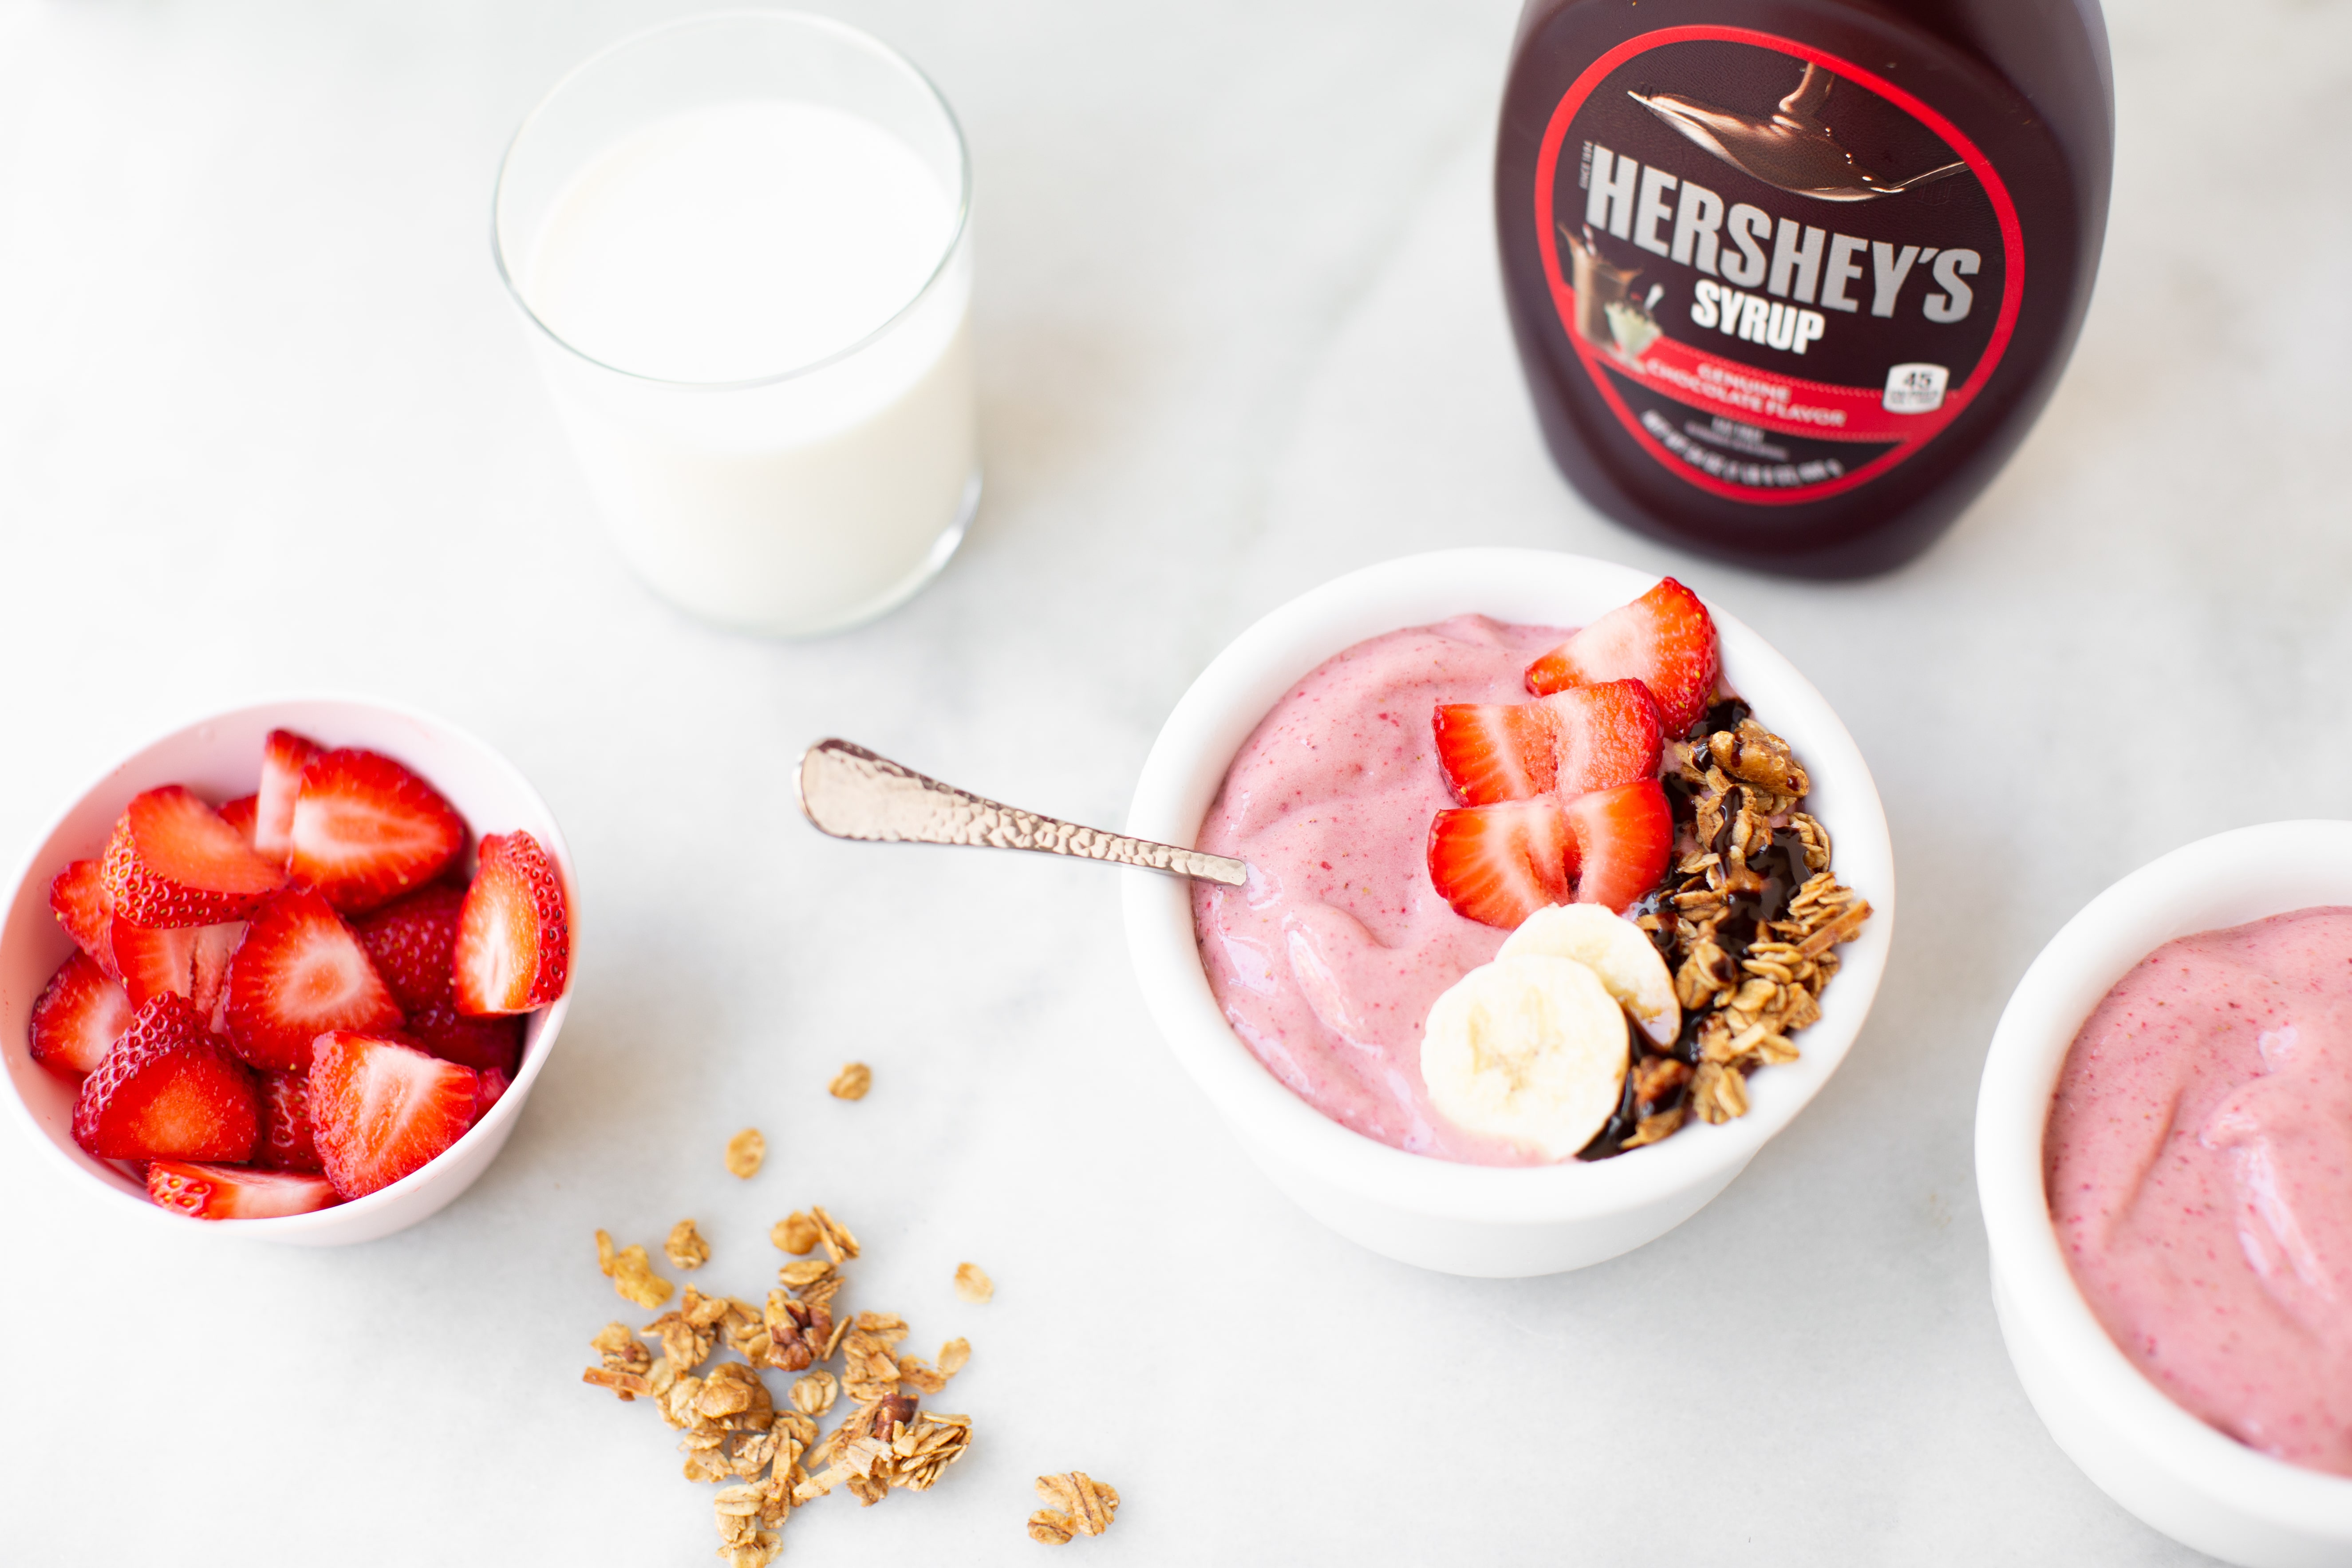 A Hershey’s strawberry banana smoothie bowl with real milk, strawberries, and Hershey’s syrup